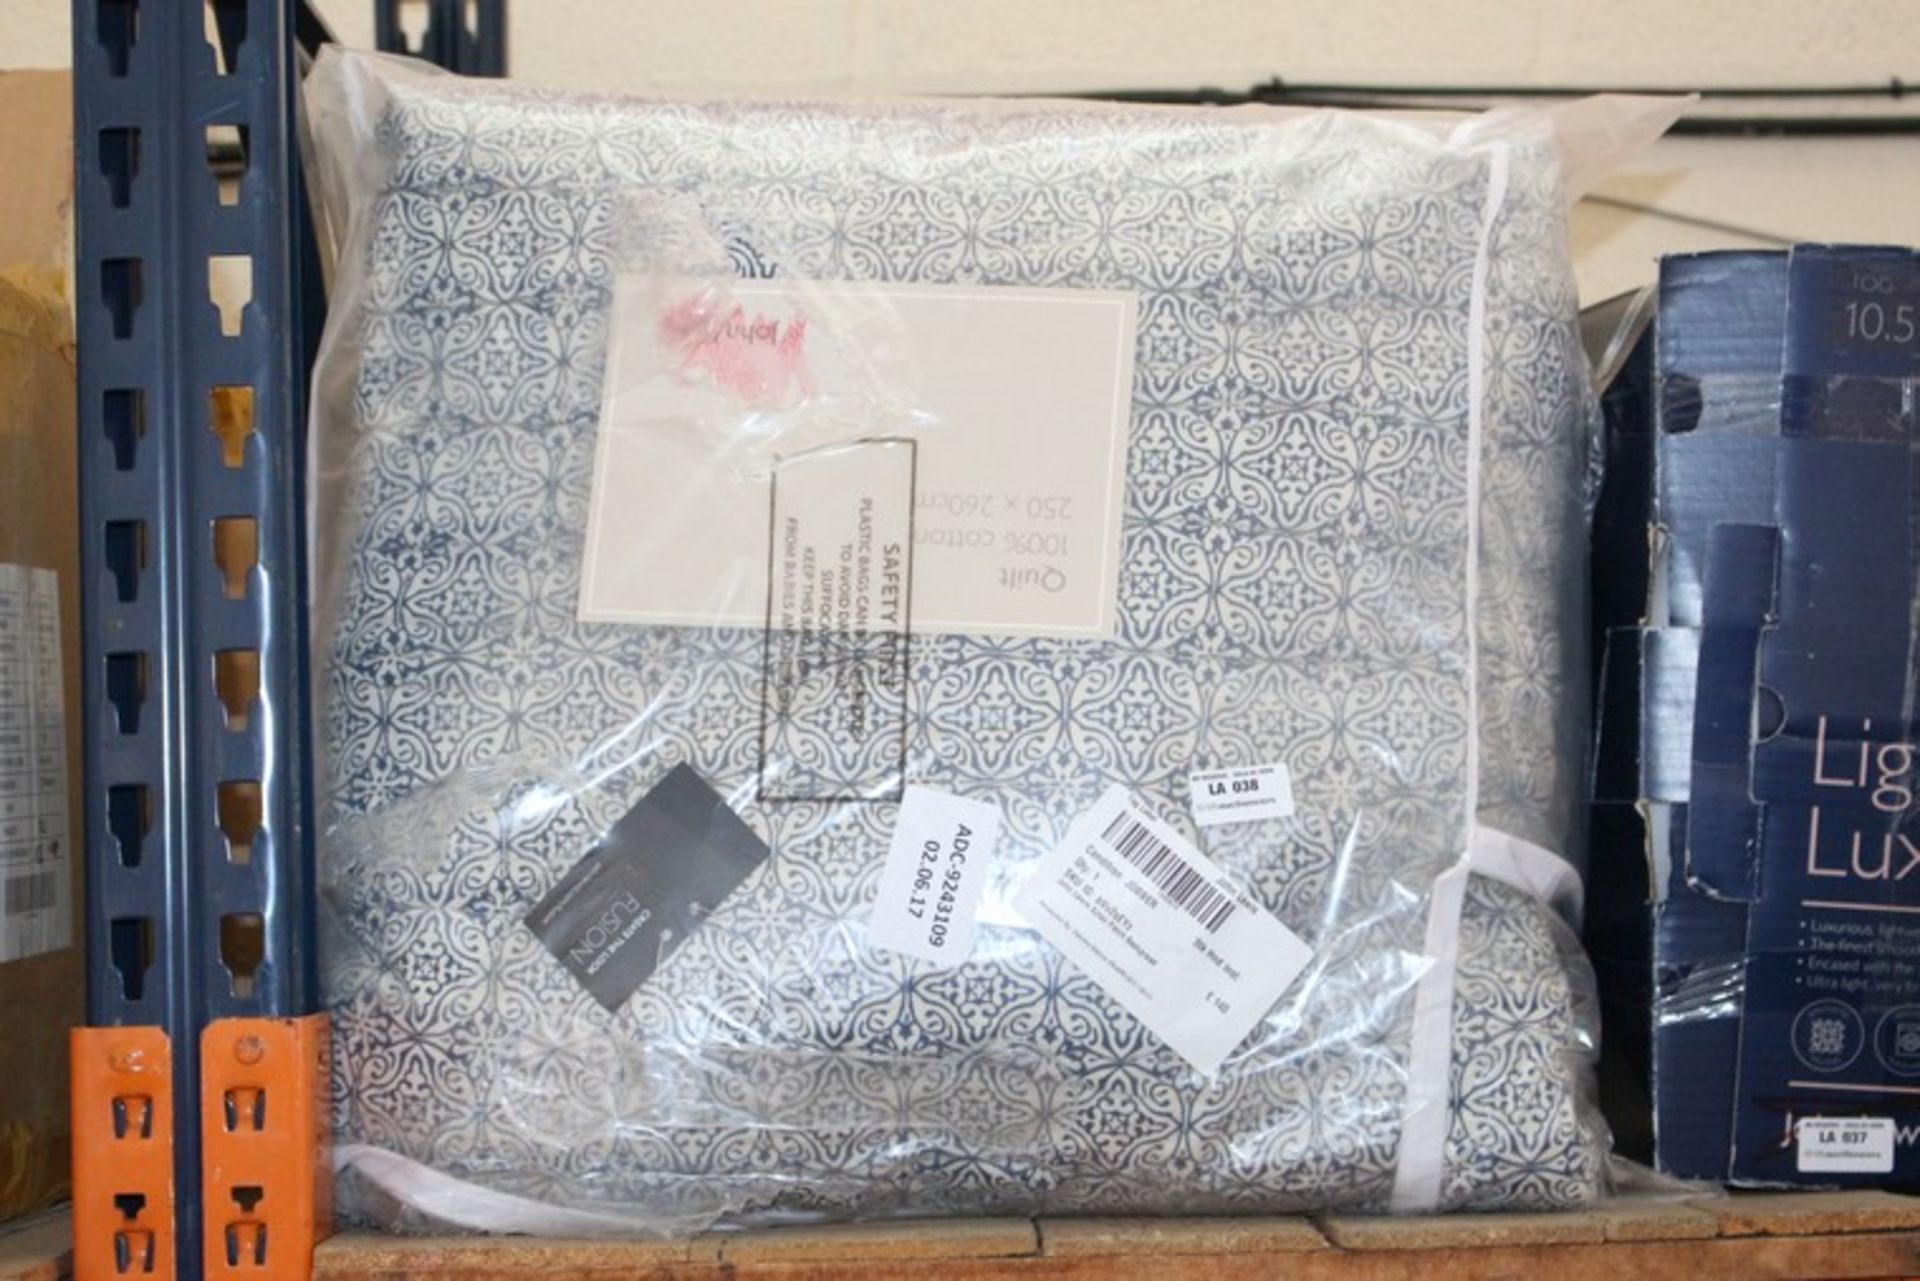 1 x BAGGED AZTEC PATCH DESIGNER BEDSPREAD RRP £140 (2.6.17) *PLEASE NOTE THAT THE BID PRICE IS